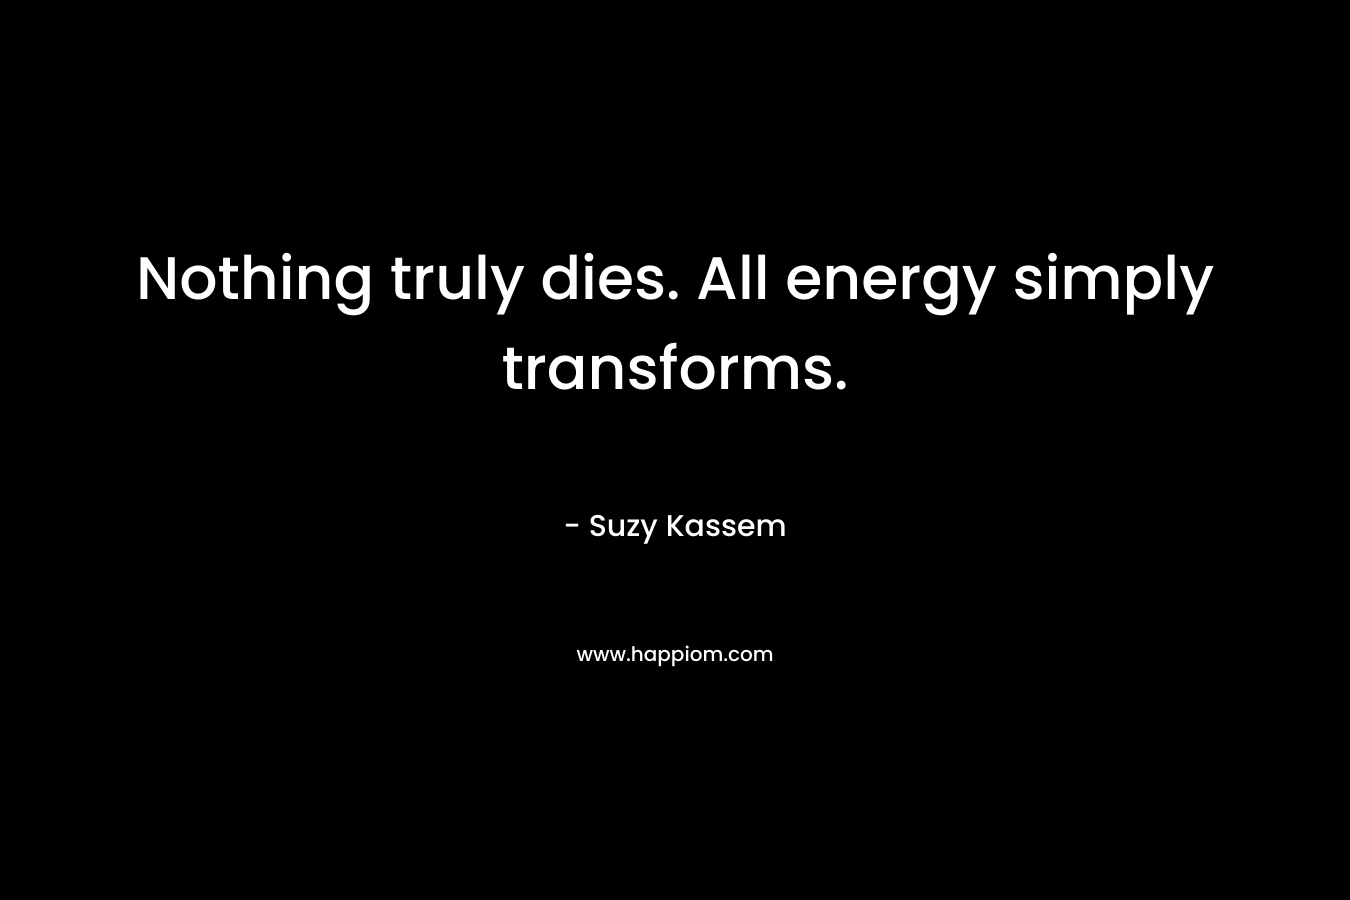 Nothing truly dies. All energy simply transforms.